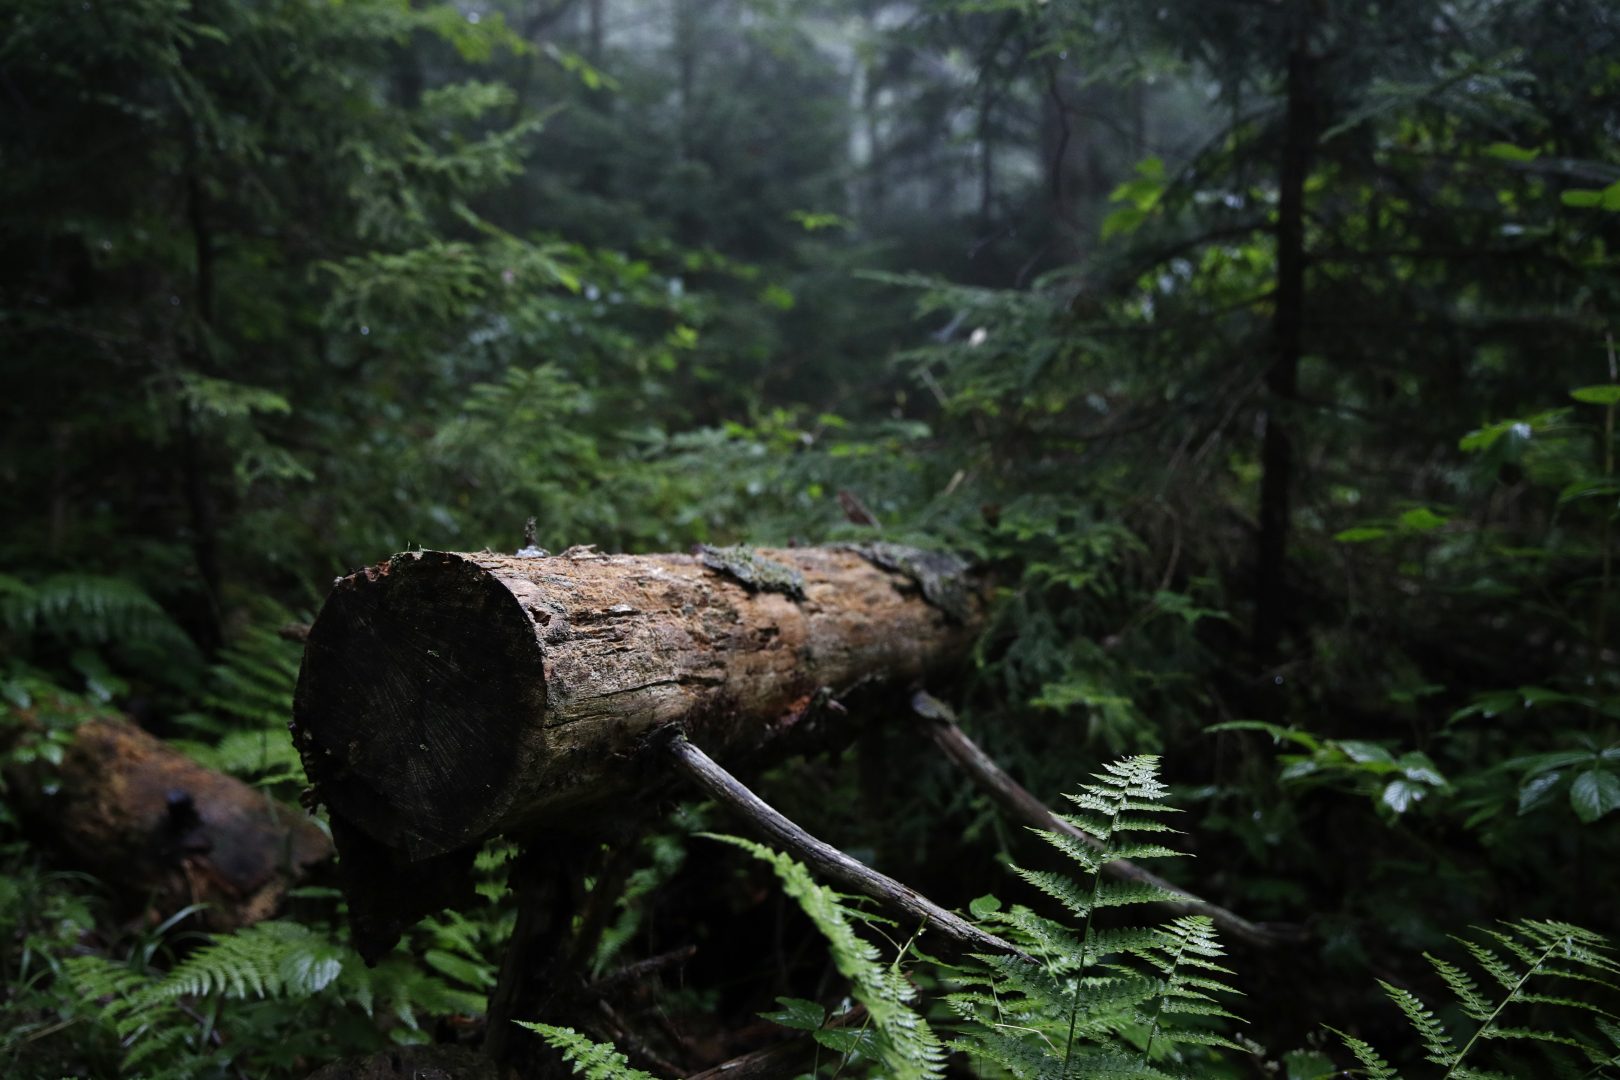 A fallen tree rests in an area of virgin spruce forest in Monongahela National Forest, W.Va., on Aug. 27, 2019. The Appalachian highlands once supported a large and unique ecosystem, dominated by red spruce forest a century and a half ago. But commercial logging in the late 1800s and later coal mining in the 20th century stripped the landscape, leaving less than a tenth of the original red spruce forests intact. 